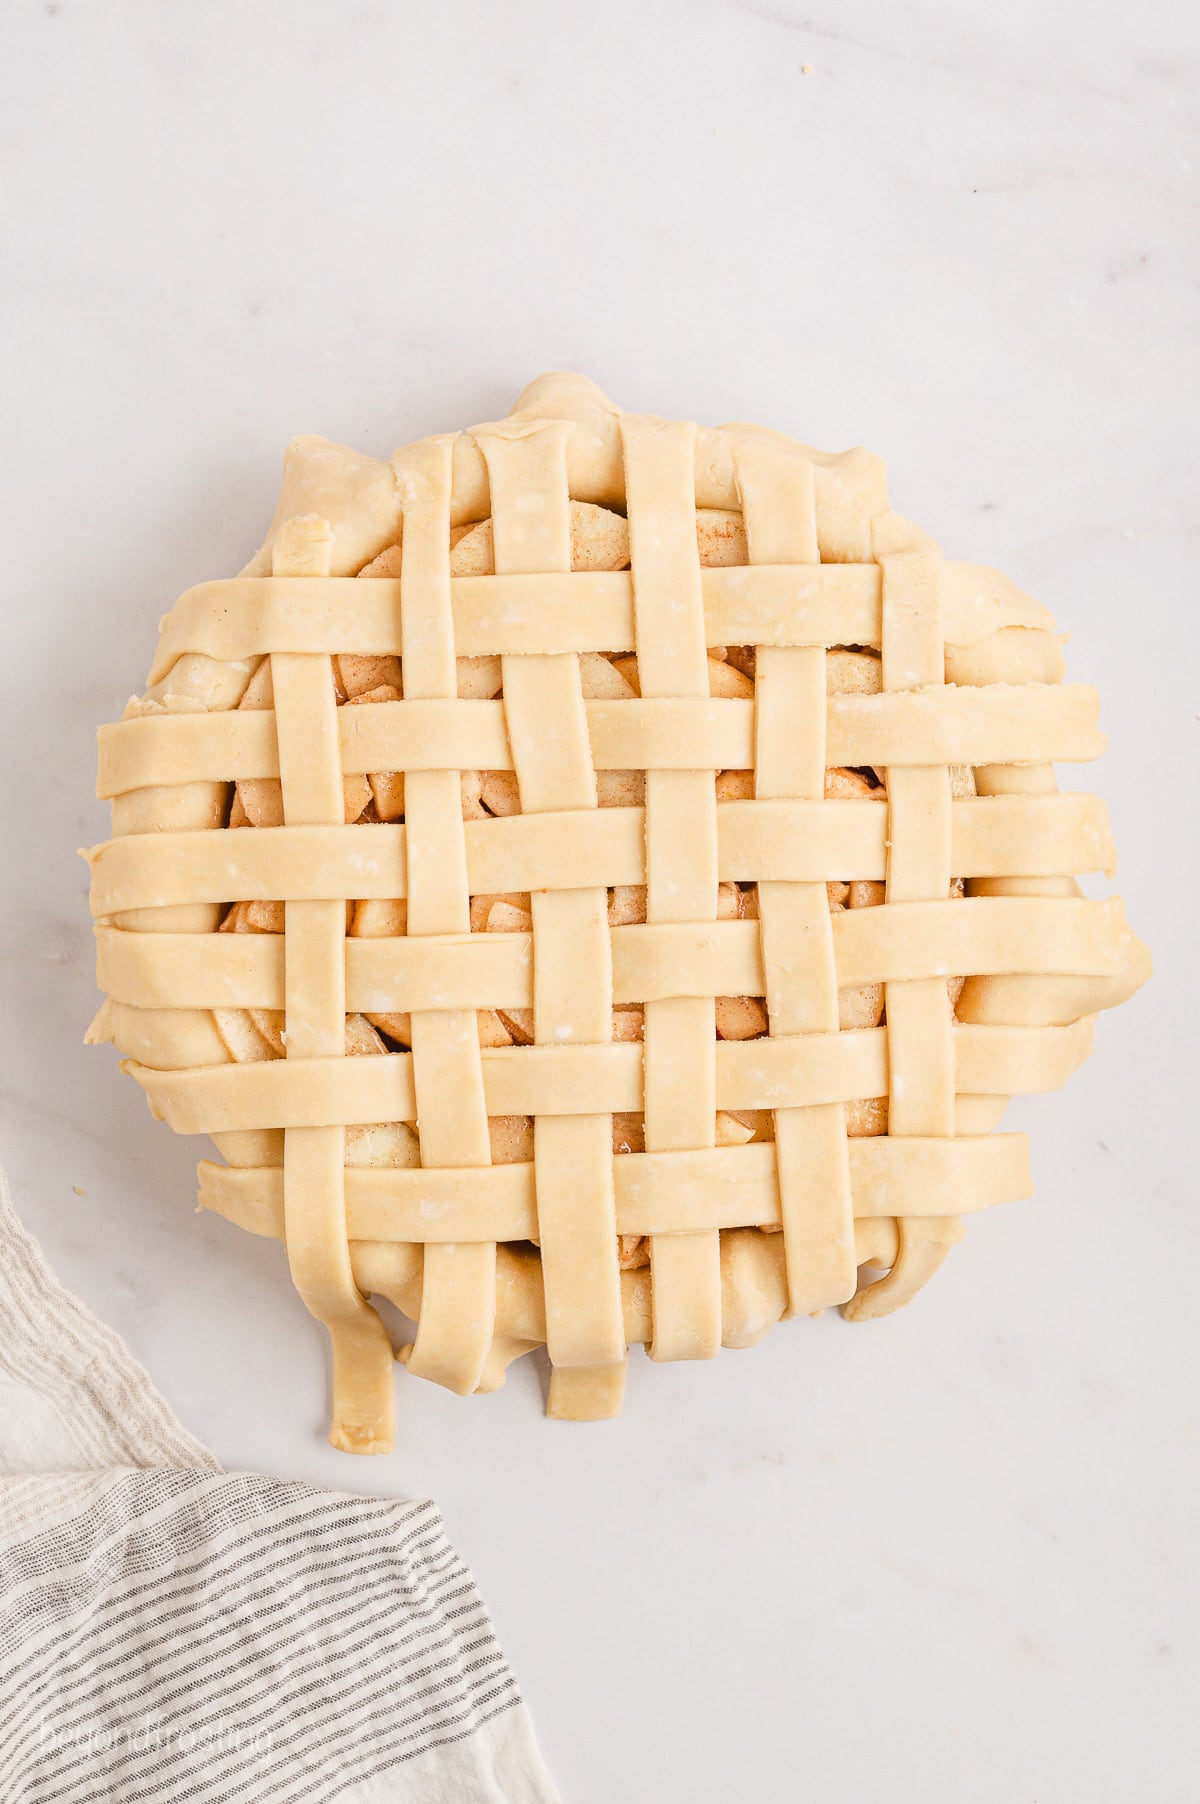 Lattice strips woven over a filled pie crust.